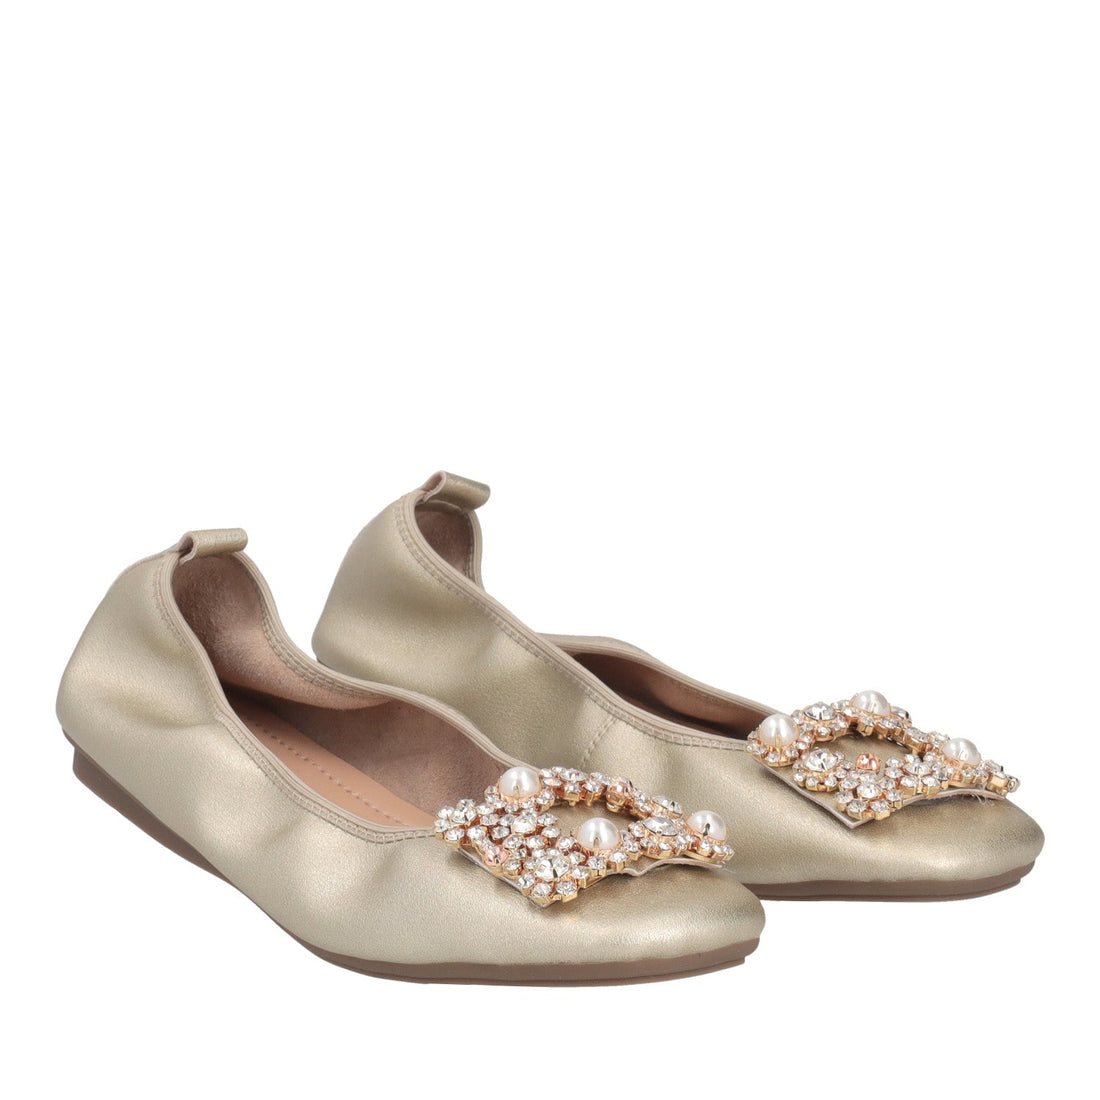 GOLD BETTY BALLERINA SHOES WITH JEWEL ACCESSORY